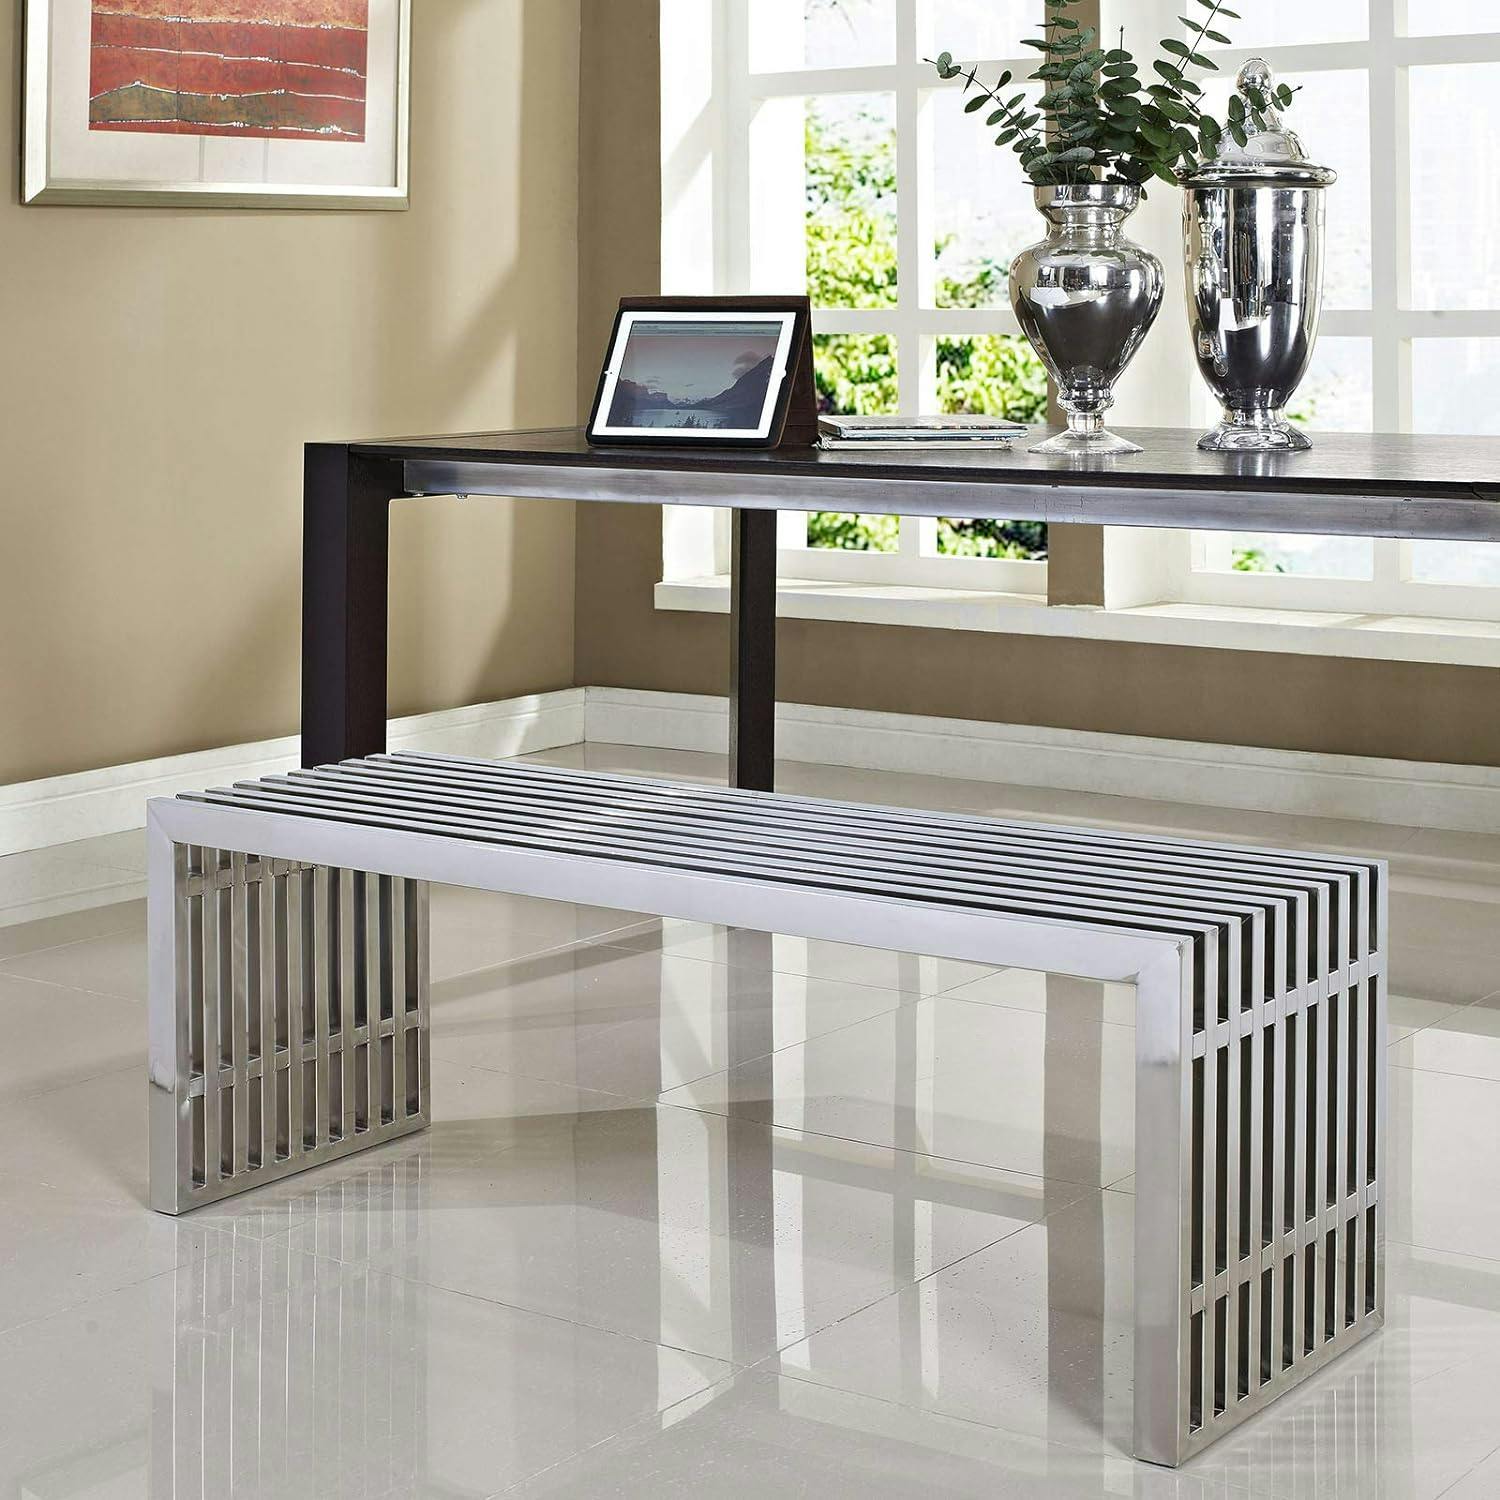 Contemporary 47" Silver Stainless Steel Linear Bench